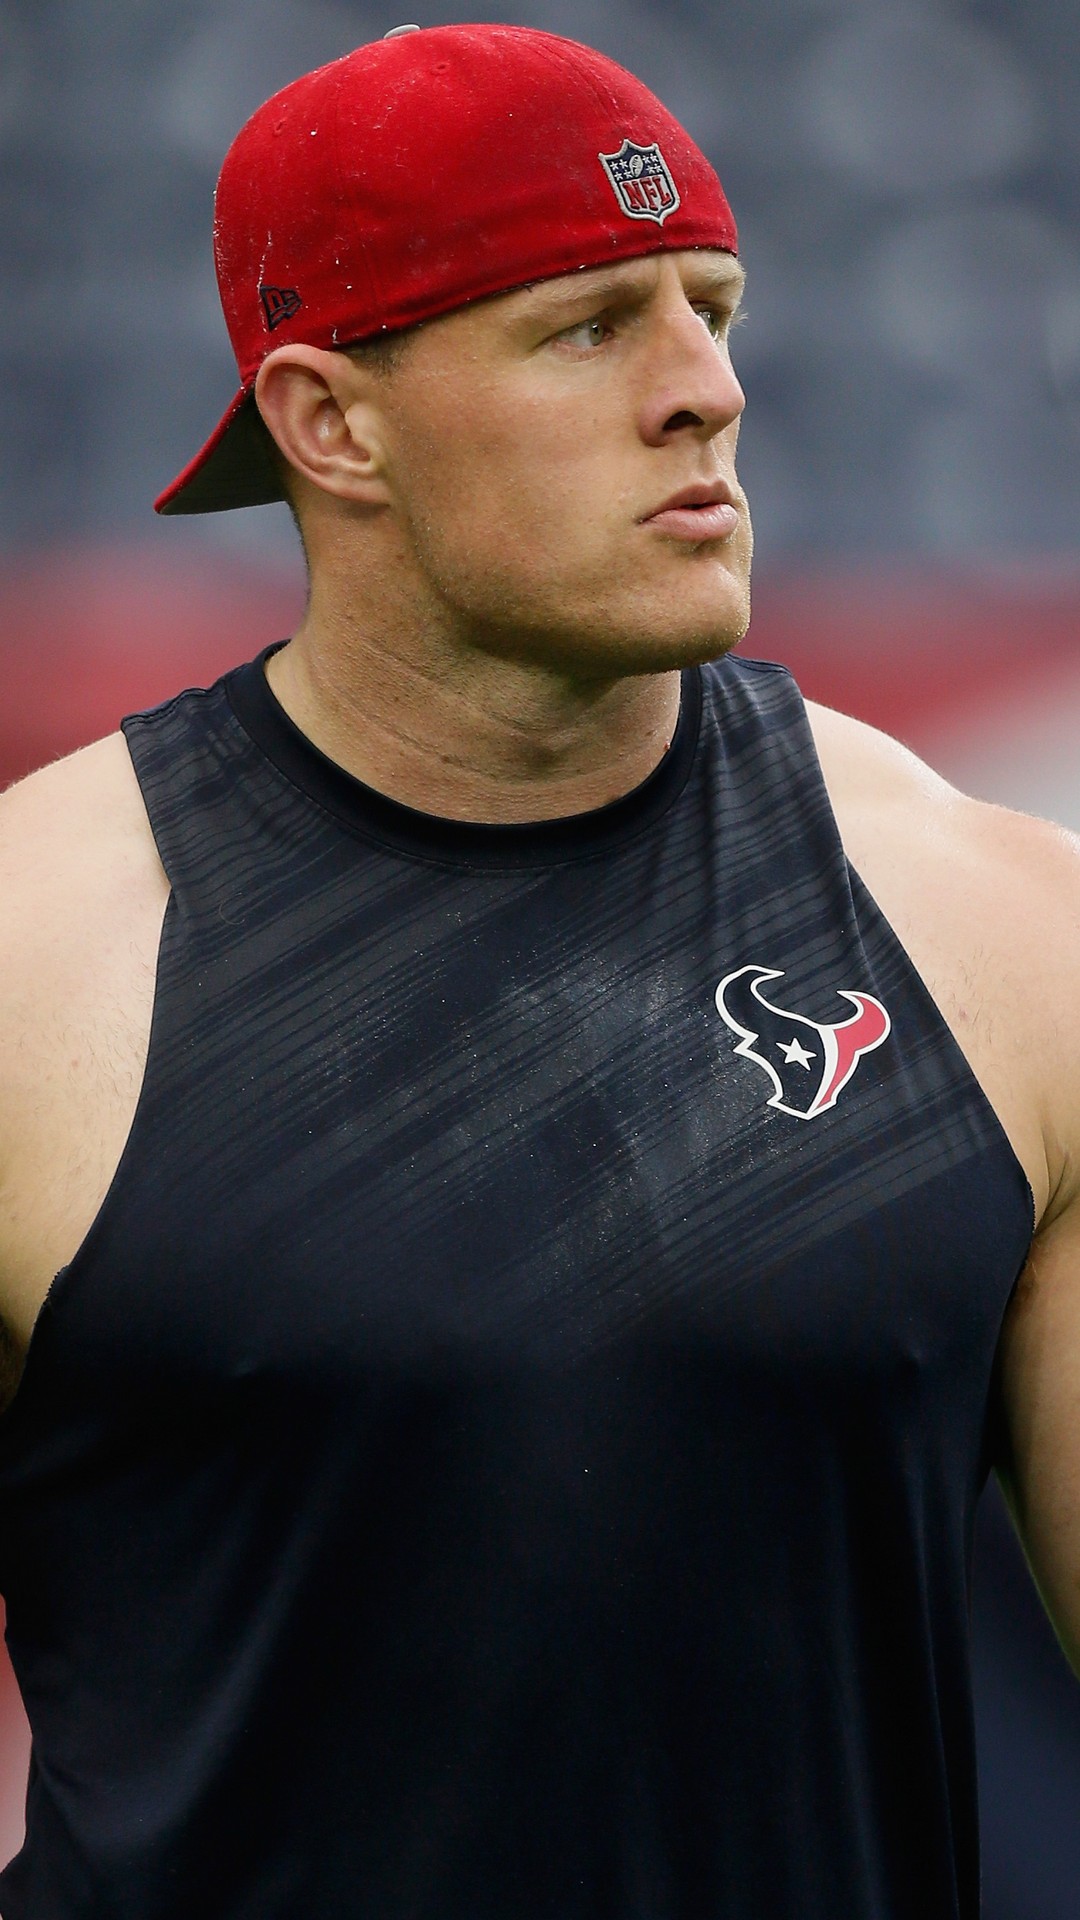 JJ Watt iPhone XS Wallpaper with high-resolution 1080x1920 pixel. Download and set as wallpaper for Apple iPhone X, XS Max, XR, 8, 7, 6, SE, iPad, Android